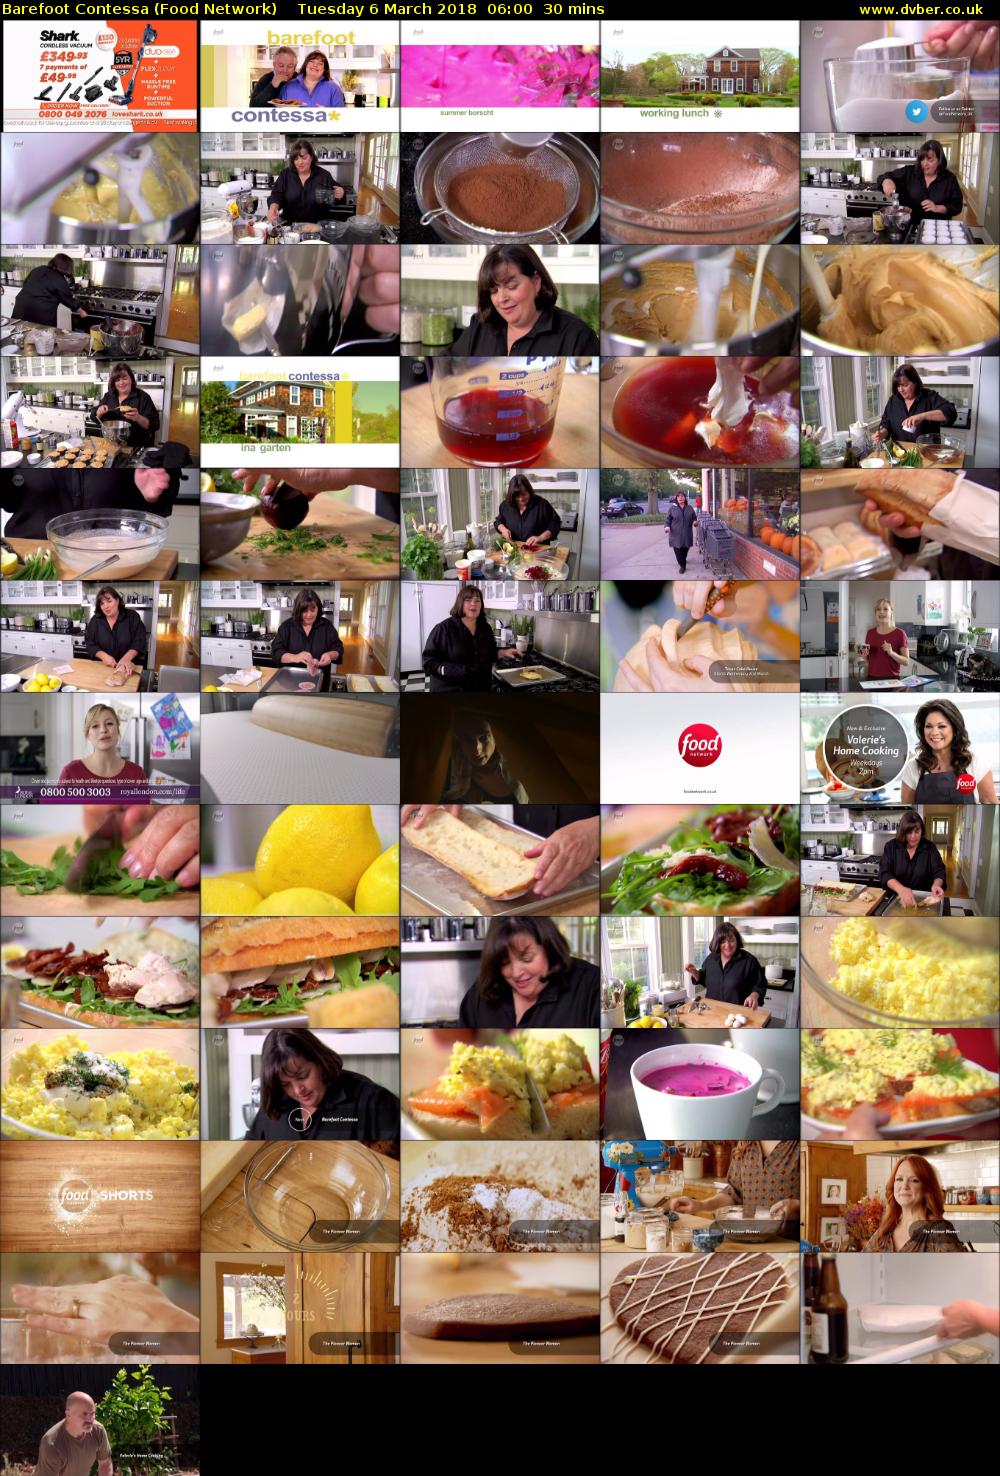 Barefoot Contessa (Food Network) Tuesday 6 March 2018 06:00 - 06:30